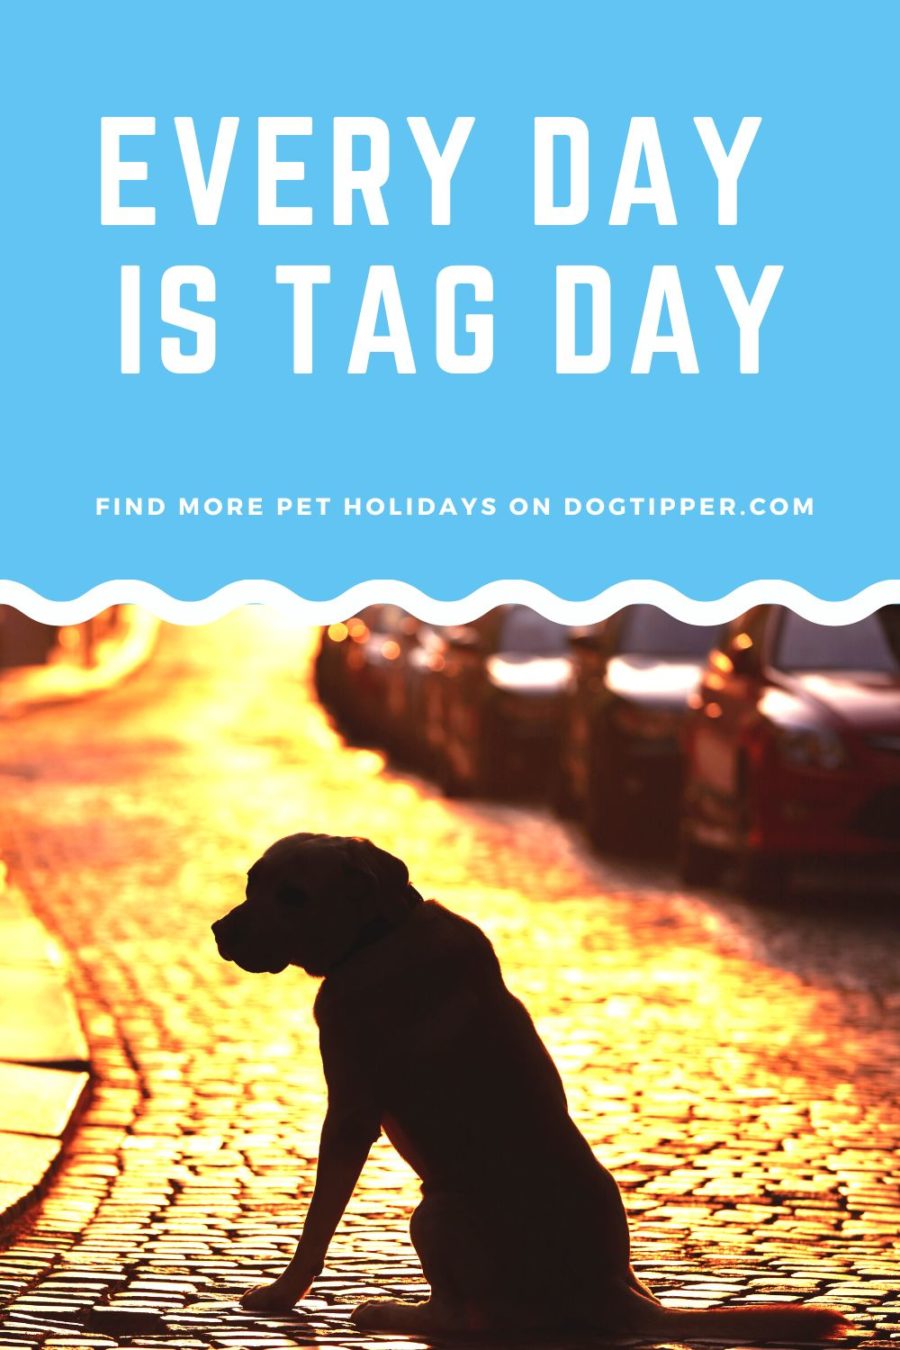 Every Day is Tag Day